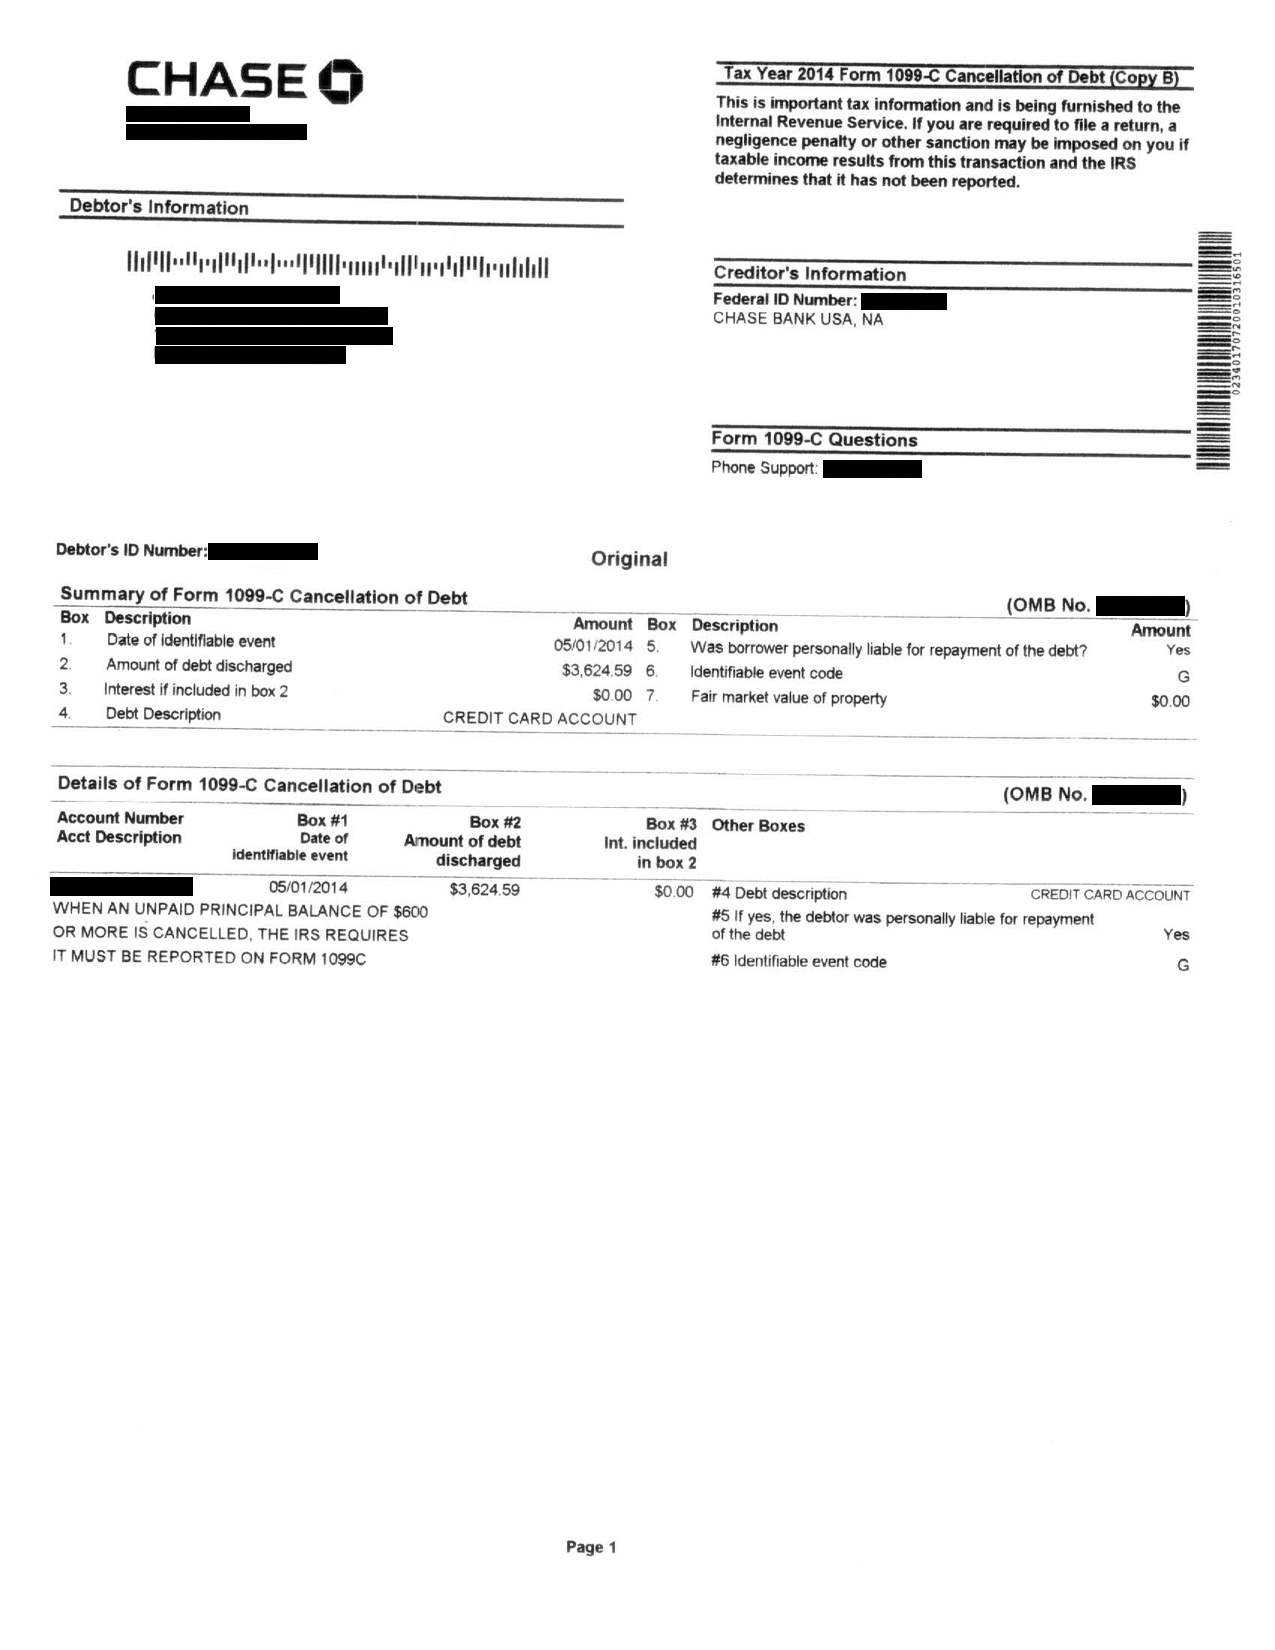 Image of a settlement letter with Chase Bank USA America with savings of 3,624 dollars